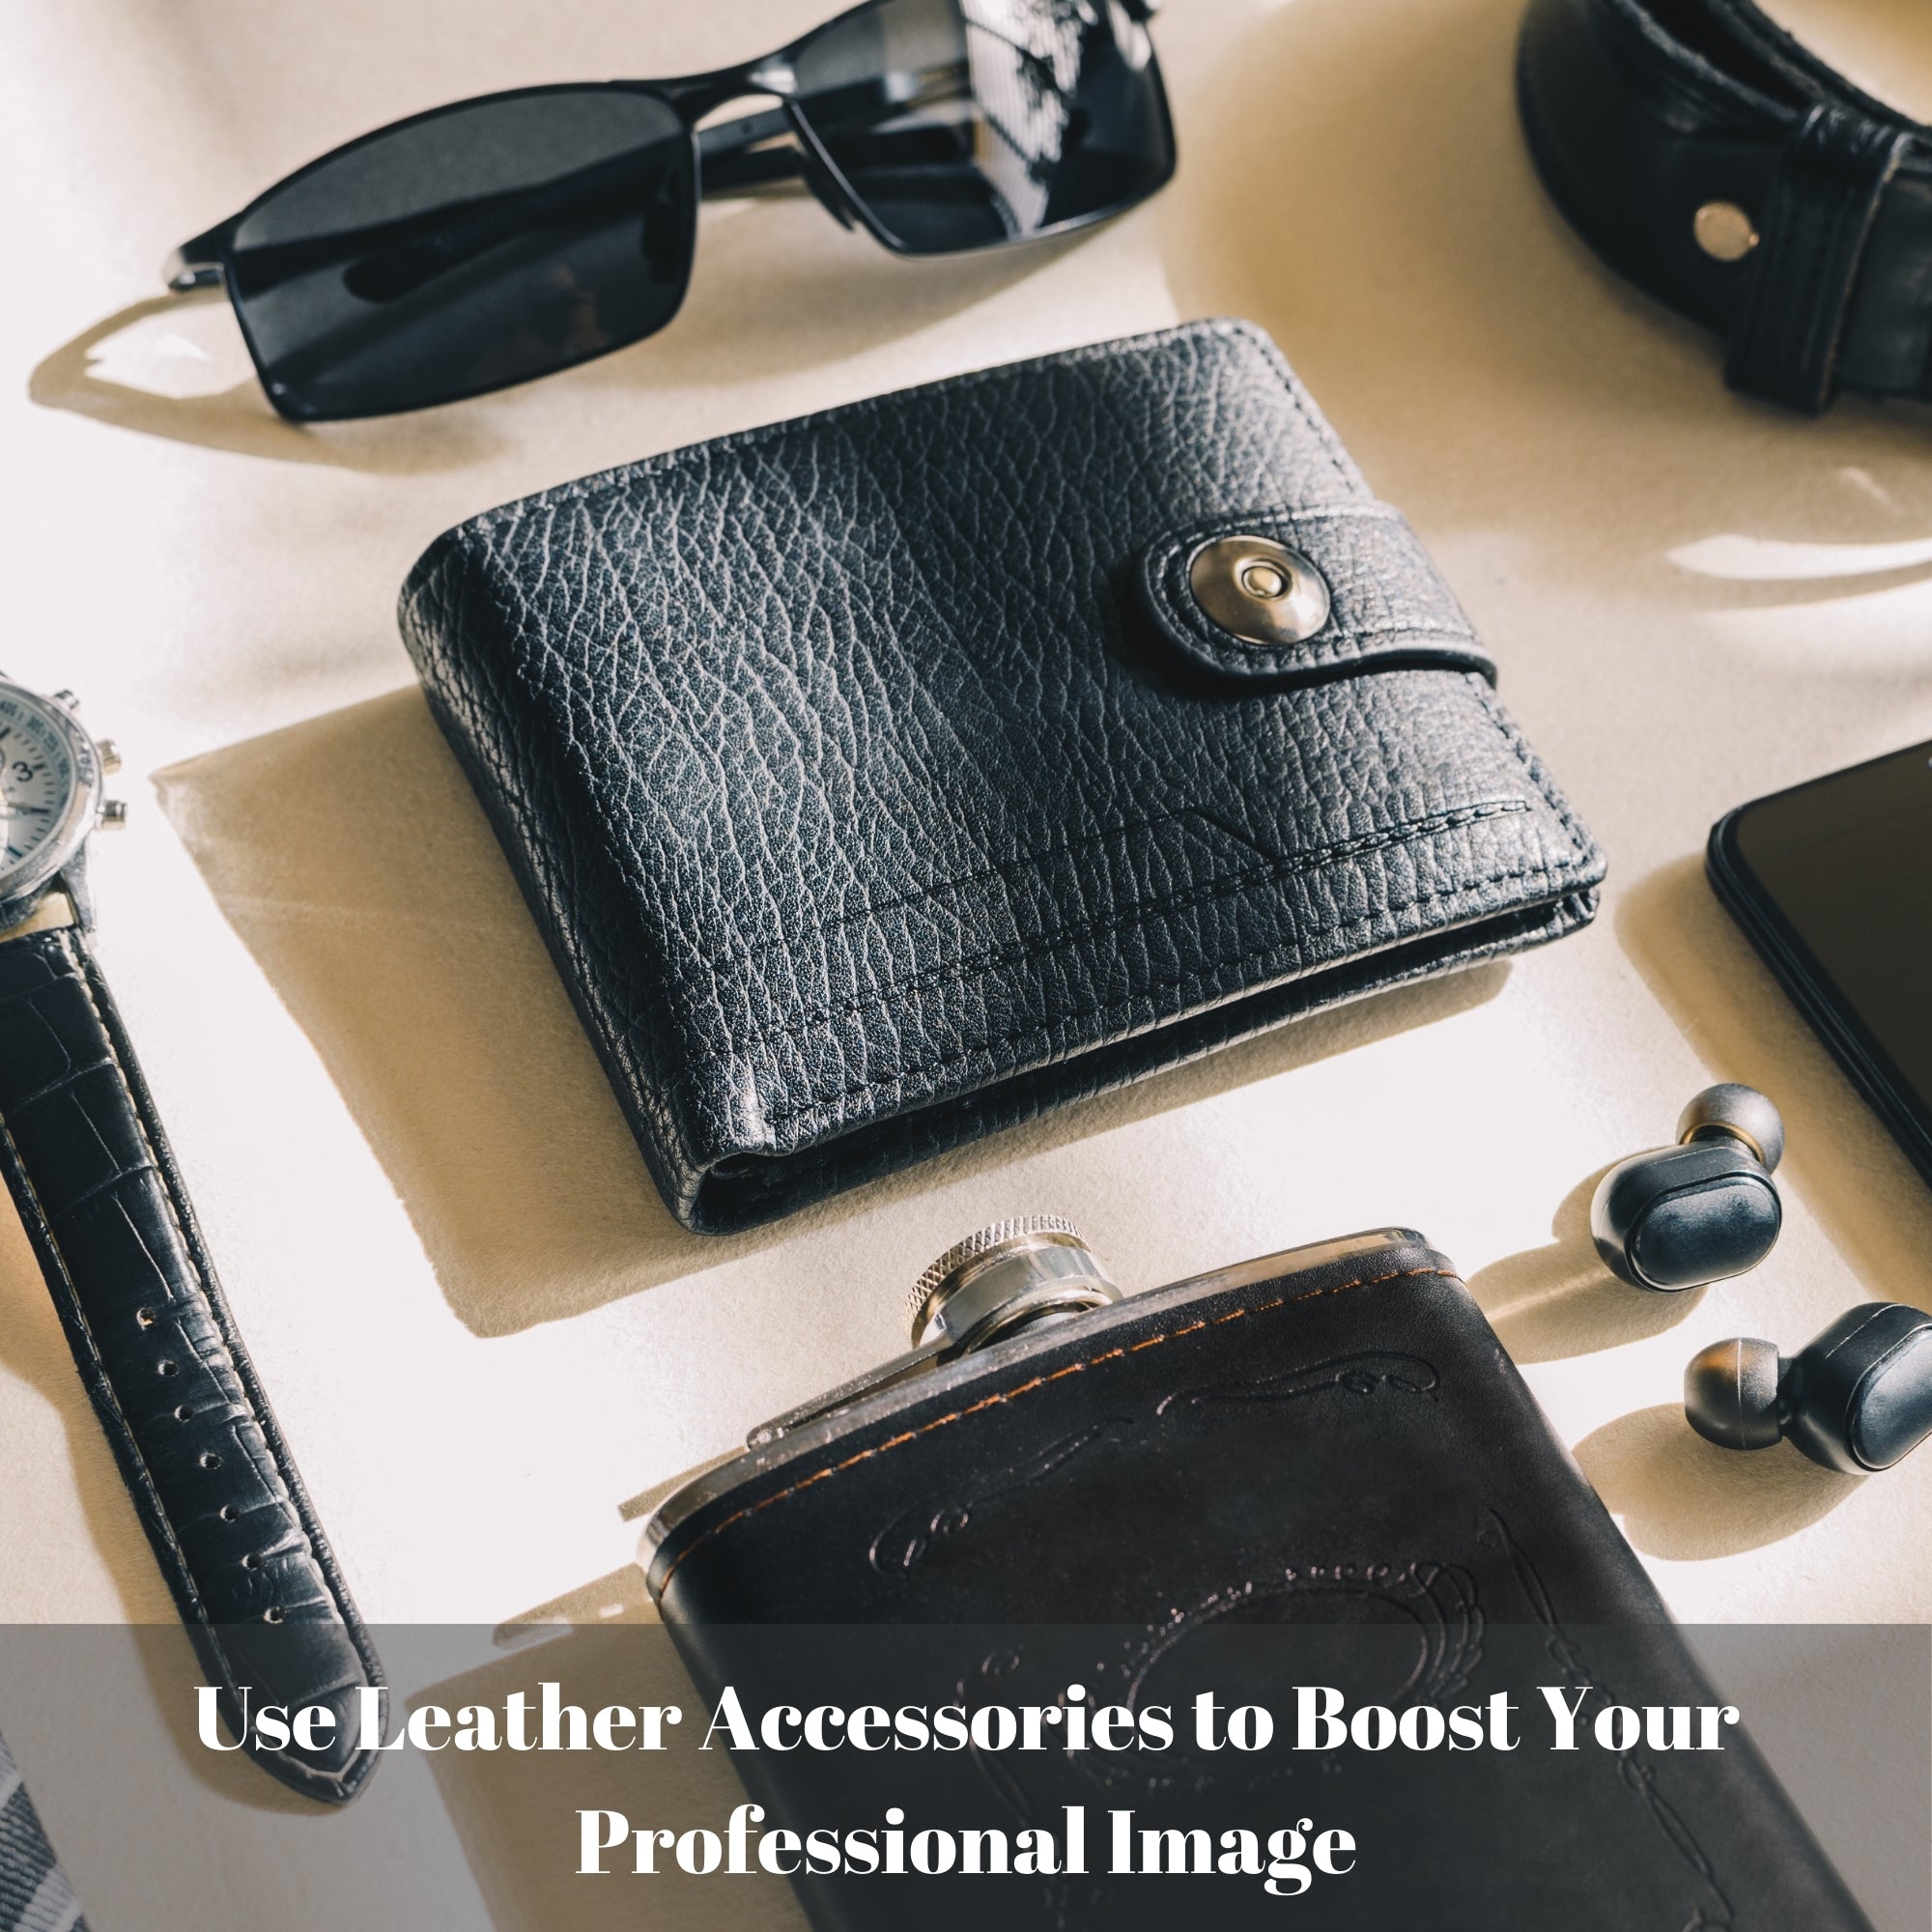 Use Leather Accessories to Boost Your Professional Image - TORONATA